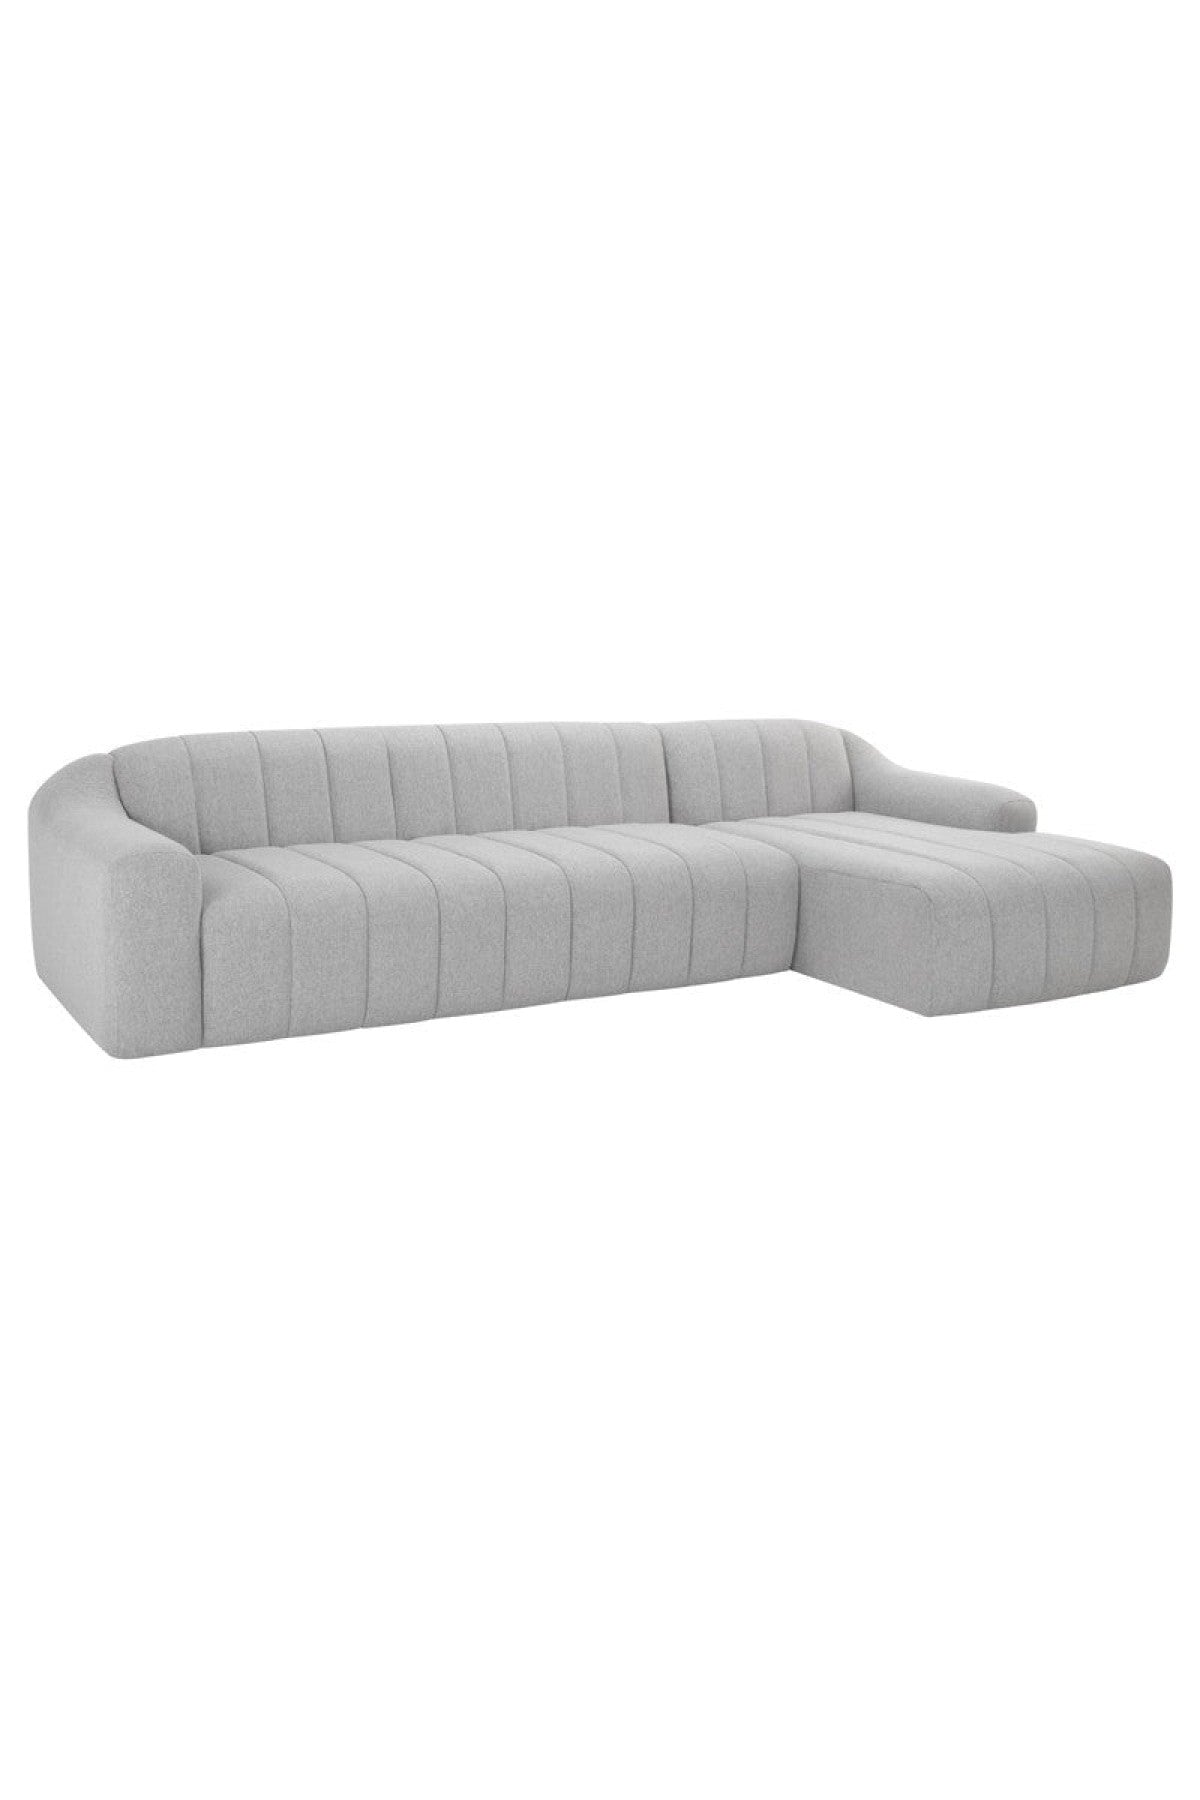 Coraline Sectional